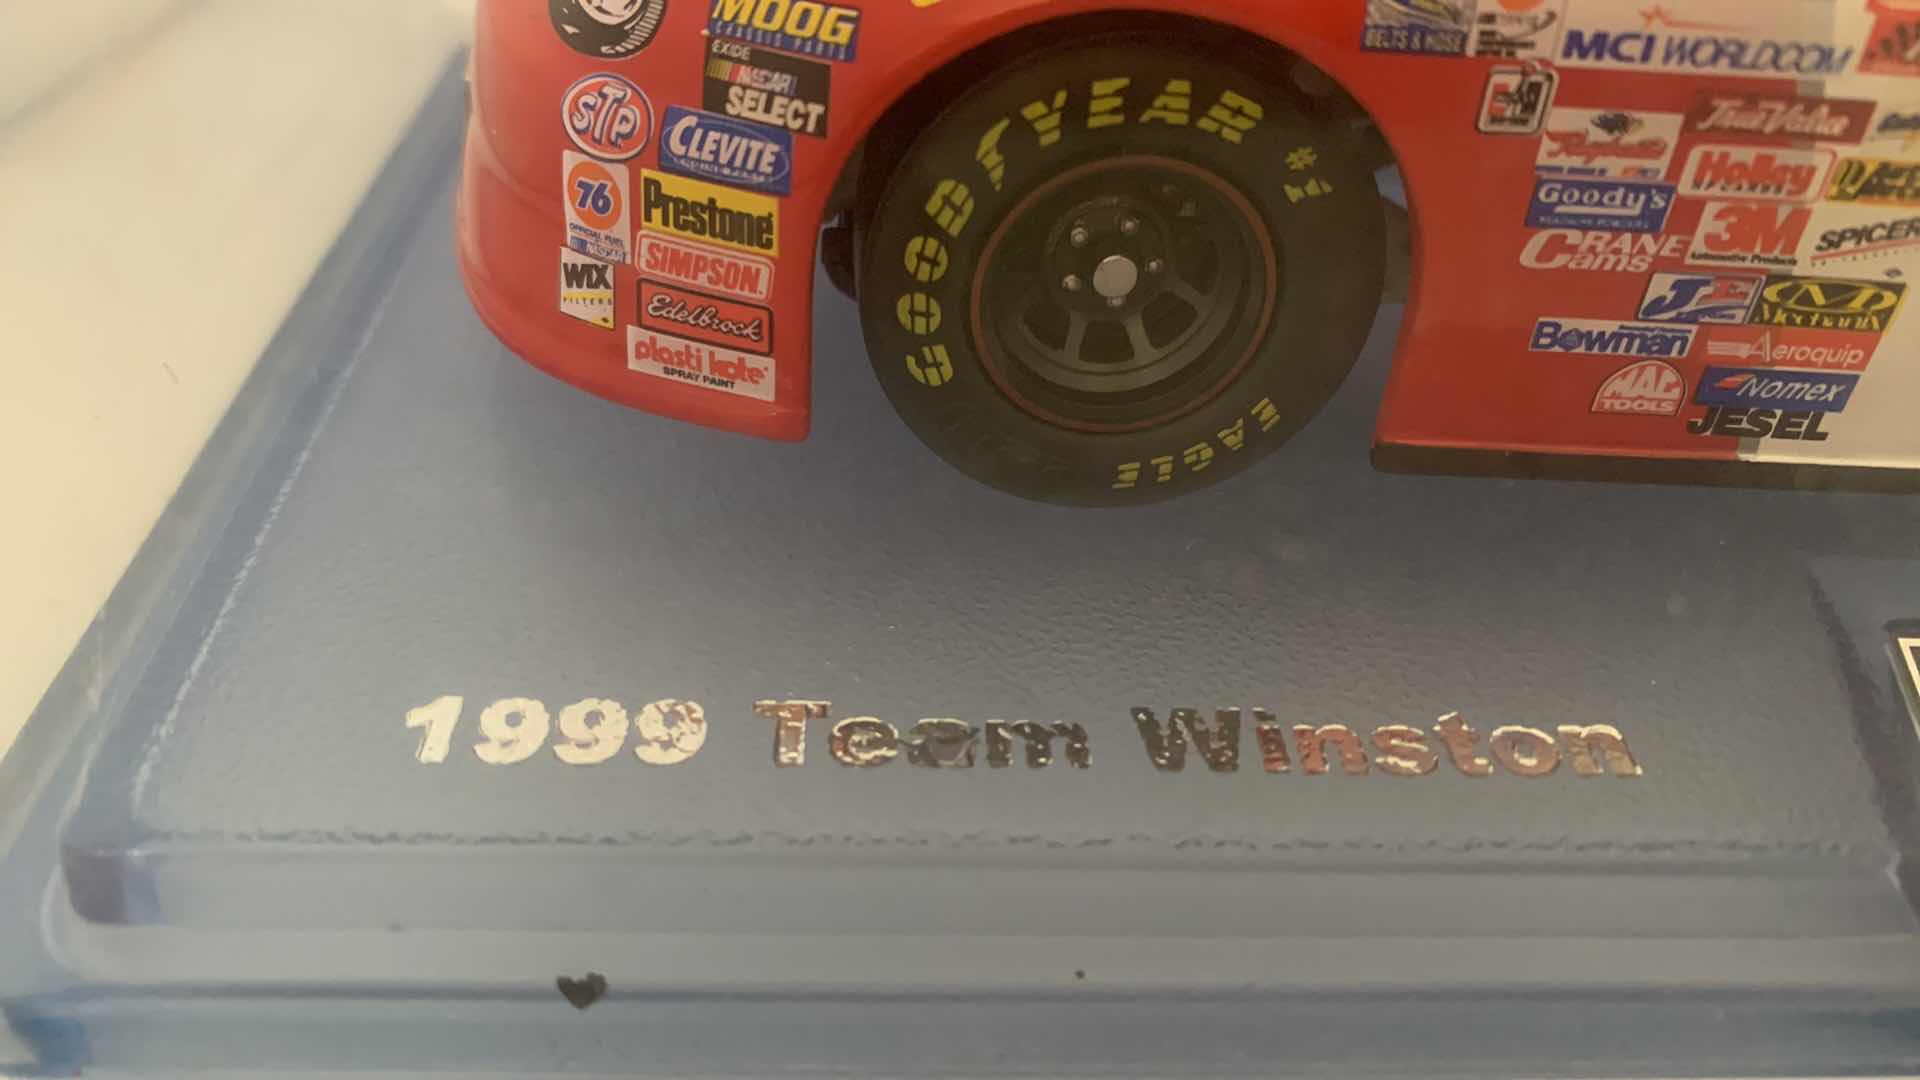 Photo 6 of 1999 TEAM WINSTON JIMMY SPENCER DIE CAST RACE CAR IN SHOW CASE.